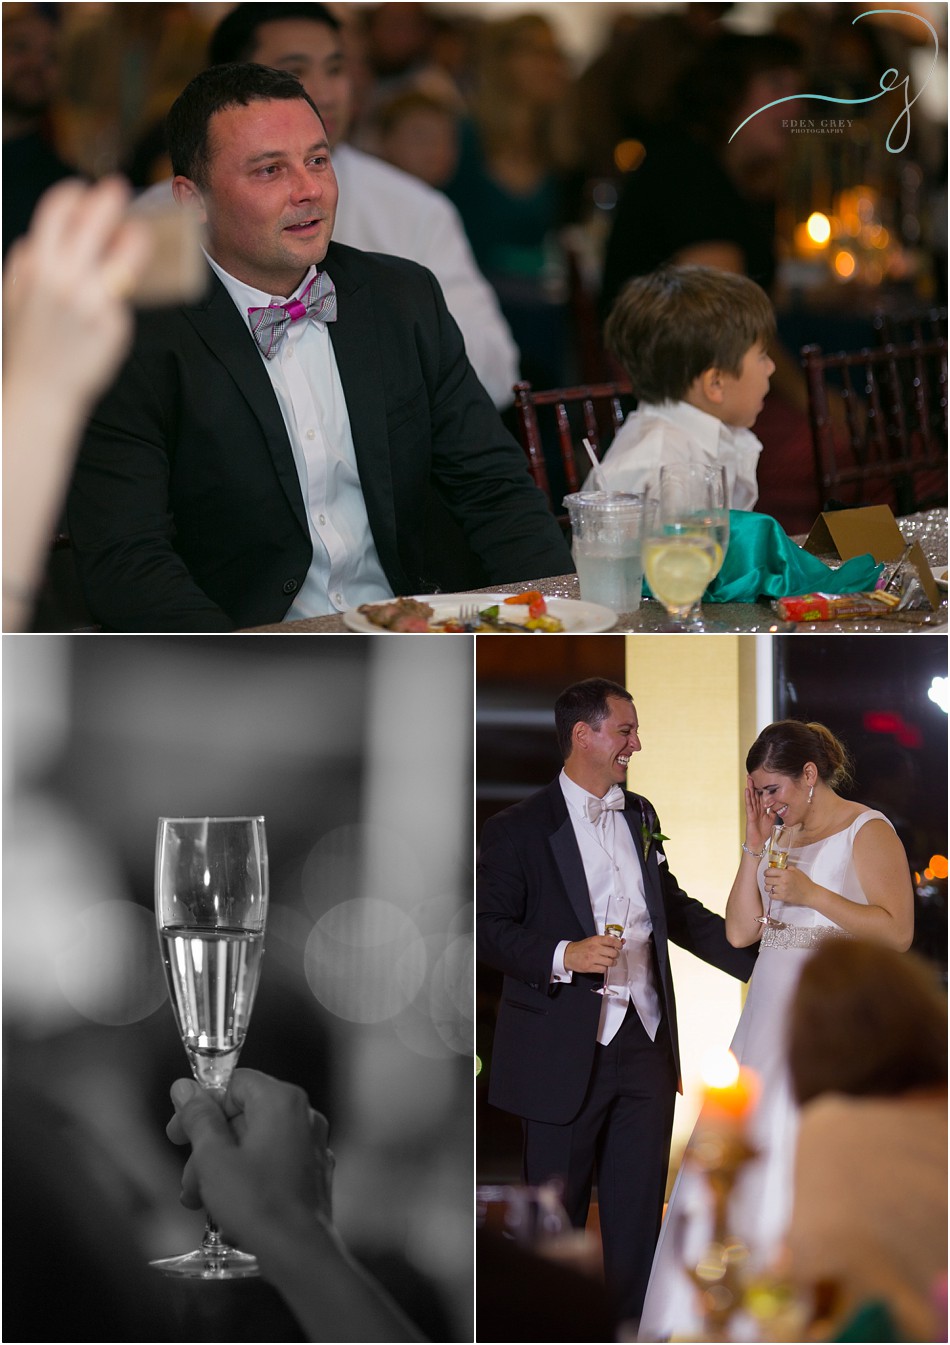 Emotional moments at a wedding